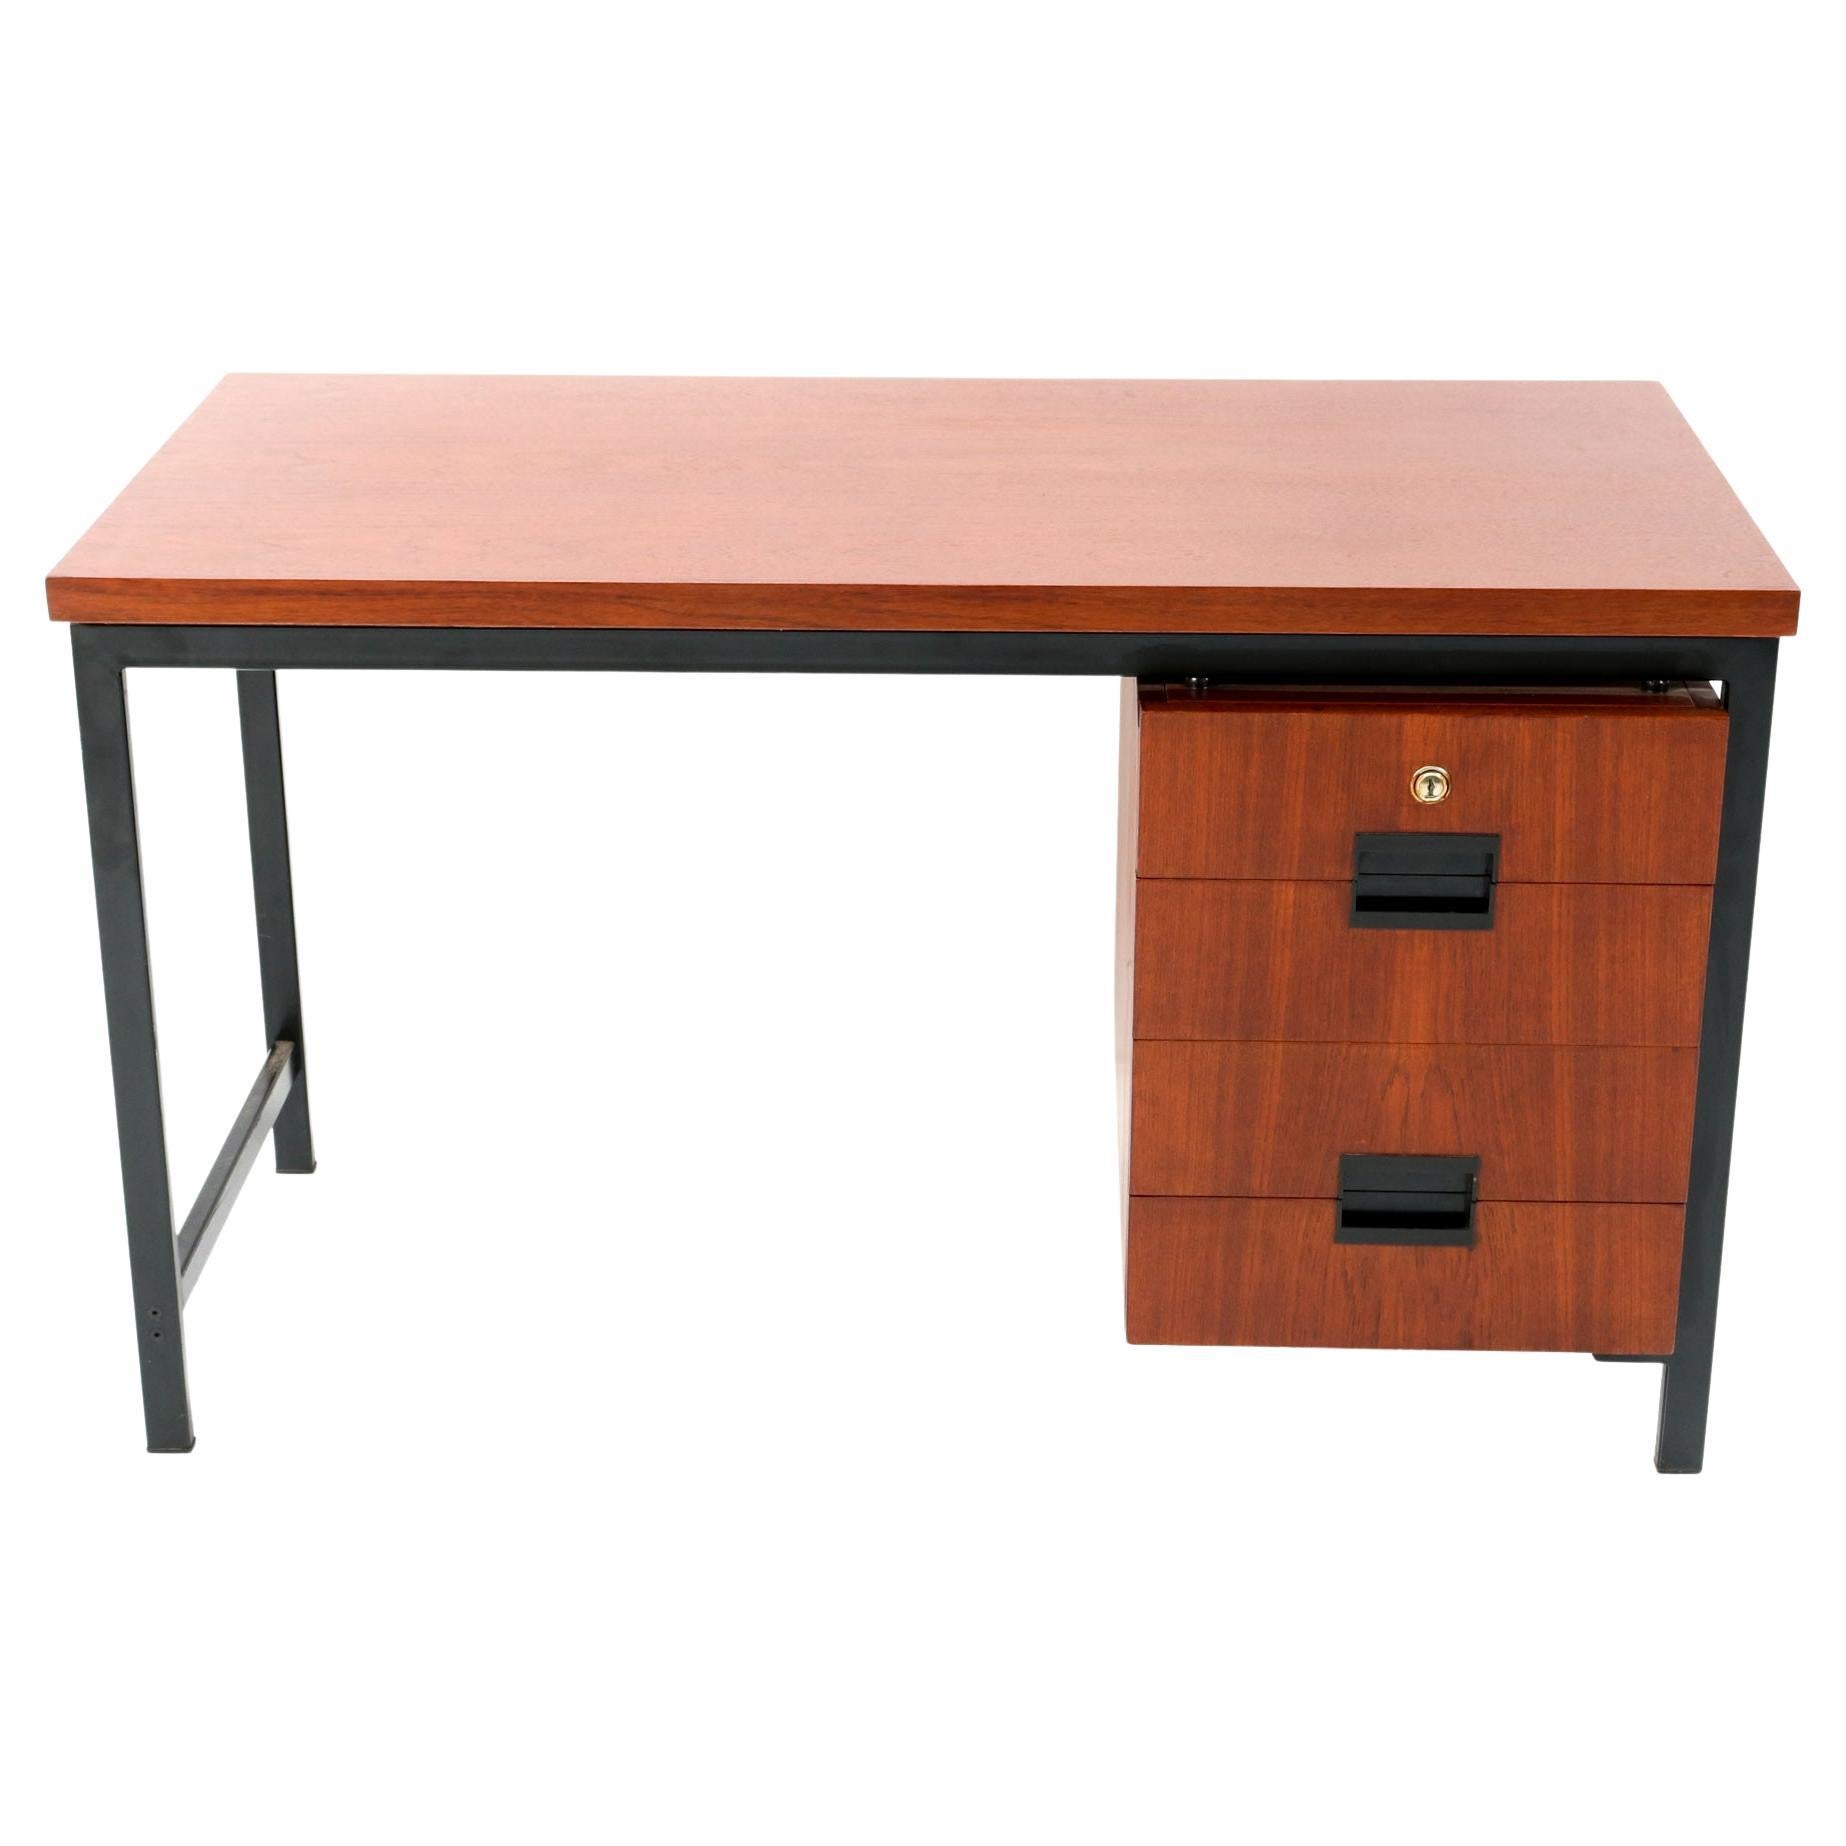 Mid-Century Modern EU01 Japanese Series desk by Cees Braakman for Pastoe, 1958 For Sale